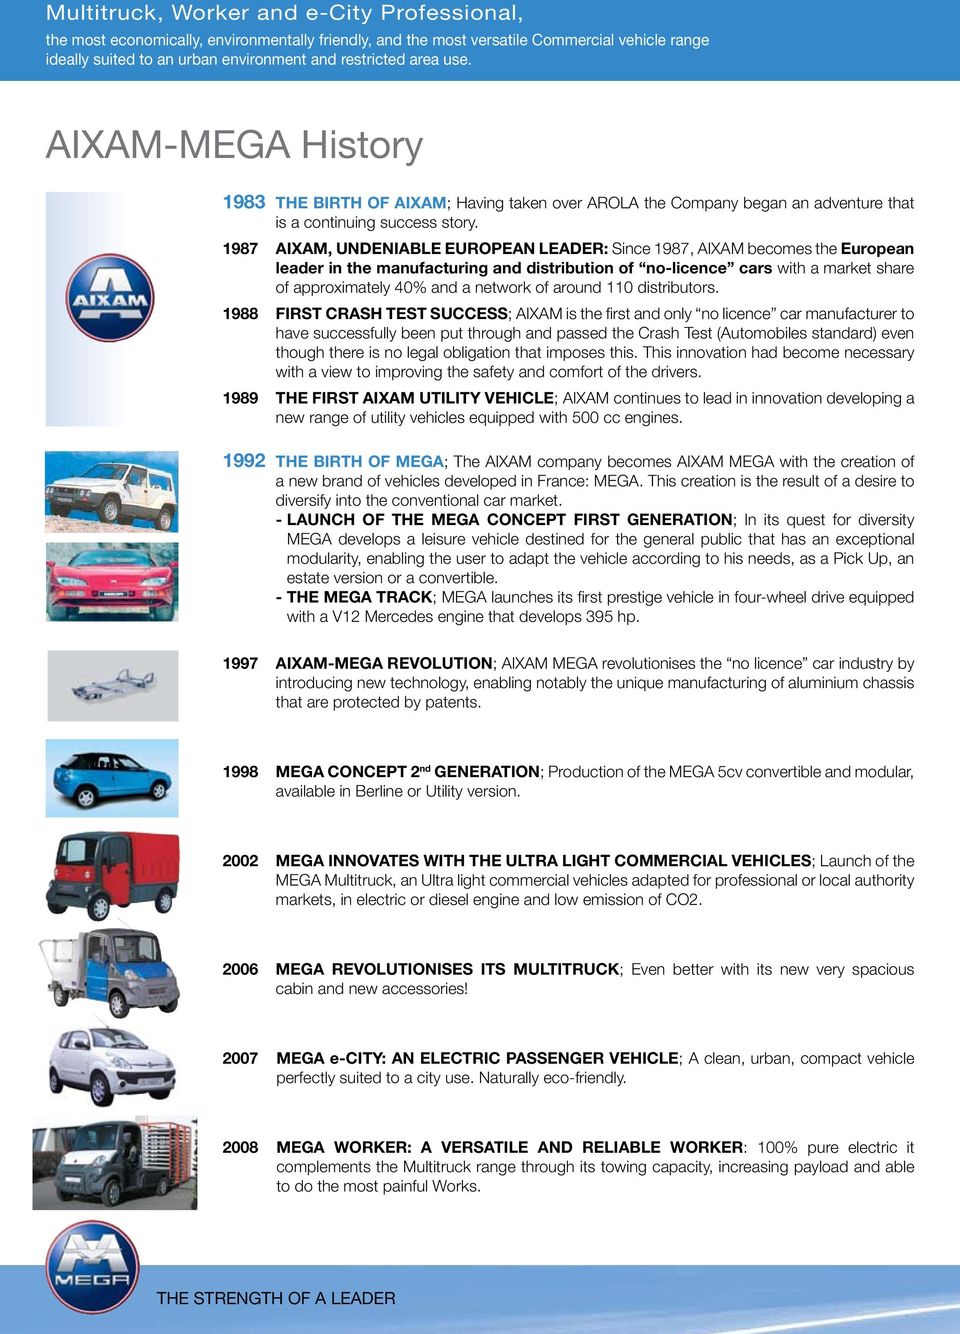 1987 AIXAM, UNDENIABLE EUROPEAN LEADER: Since 1987, AIXAM becomes the European leader in the manufacturing and distribution of no-licence cars with a market share of approximately 40% and a network